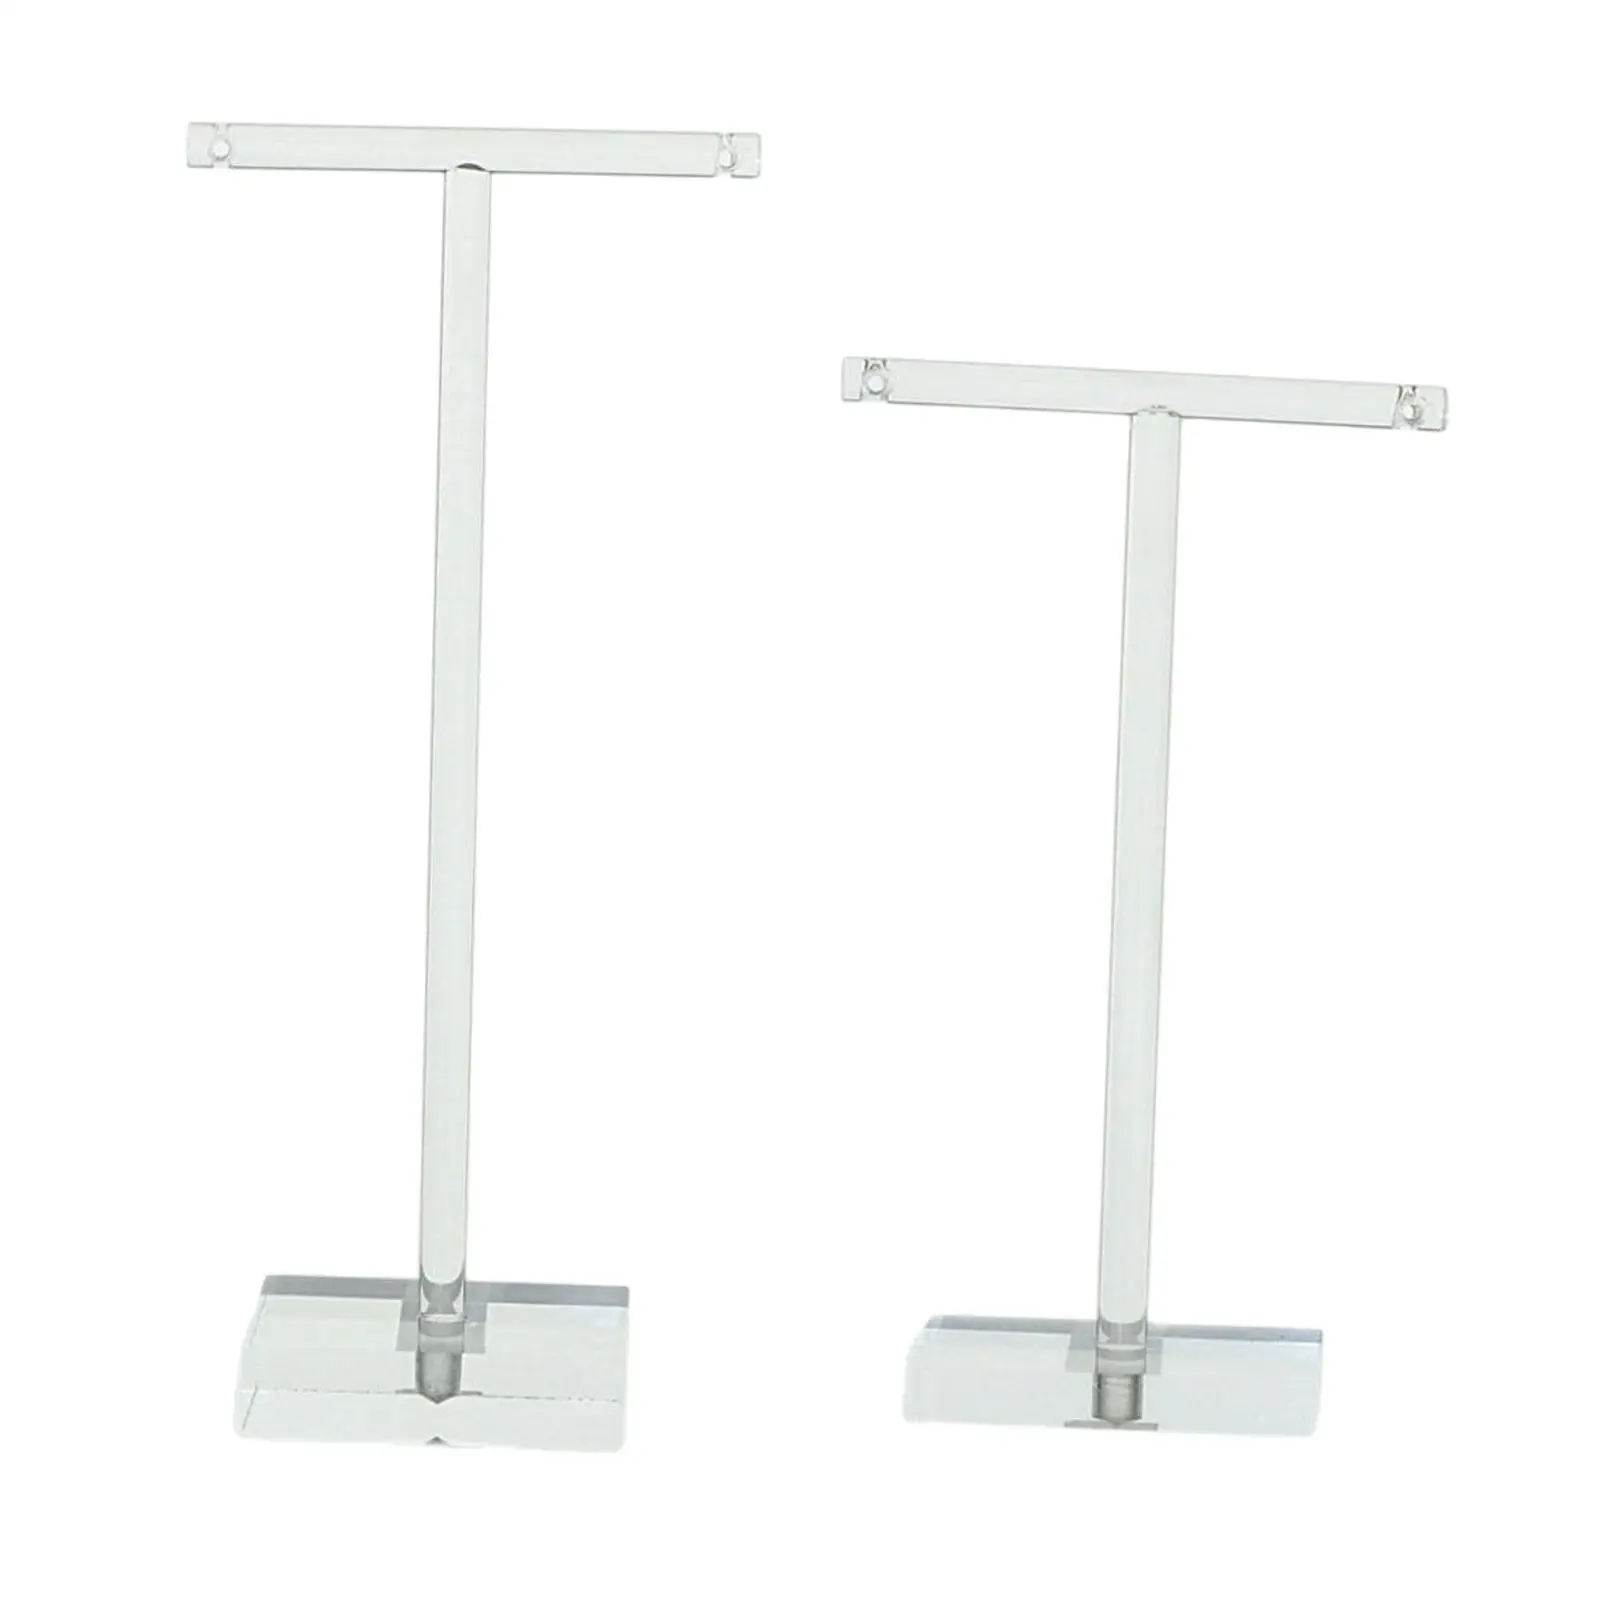 2 Pieces Jewelry Organizer T Bar Stable Base Acrylic Earring Stand Earring Display Stand for Desktop Home Vanity Store Dresser